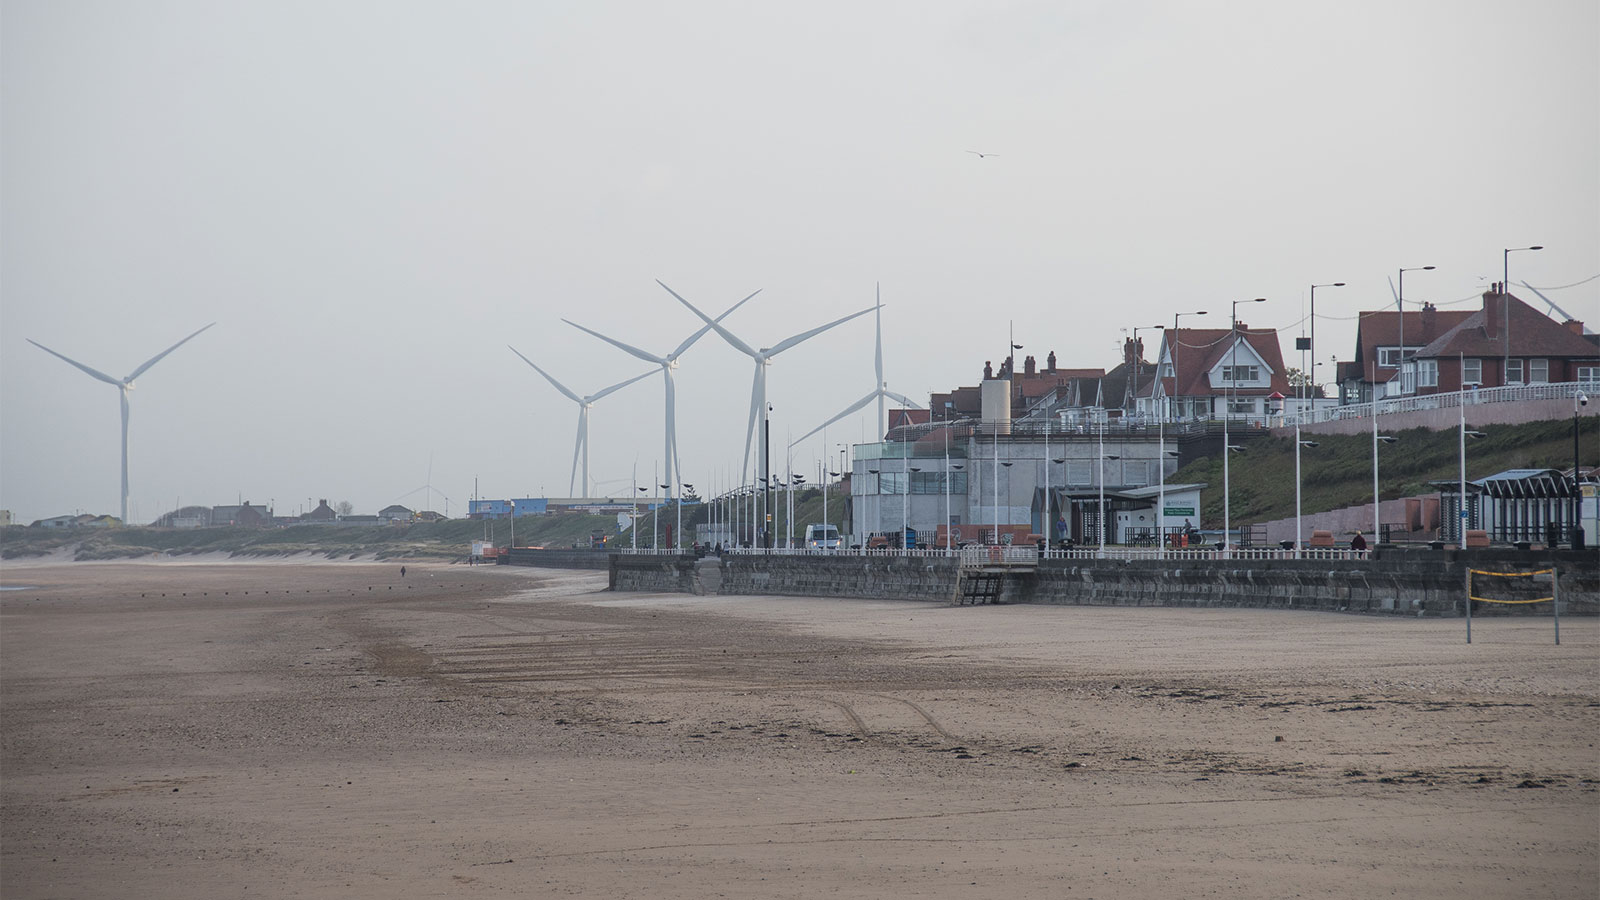 Photo of a beach community with wind turbines in the background